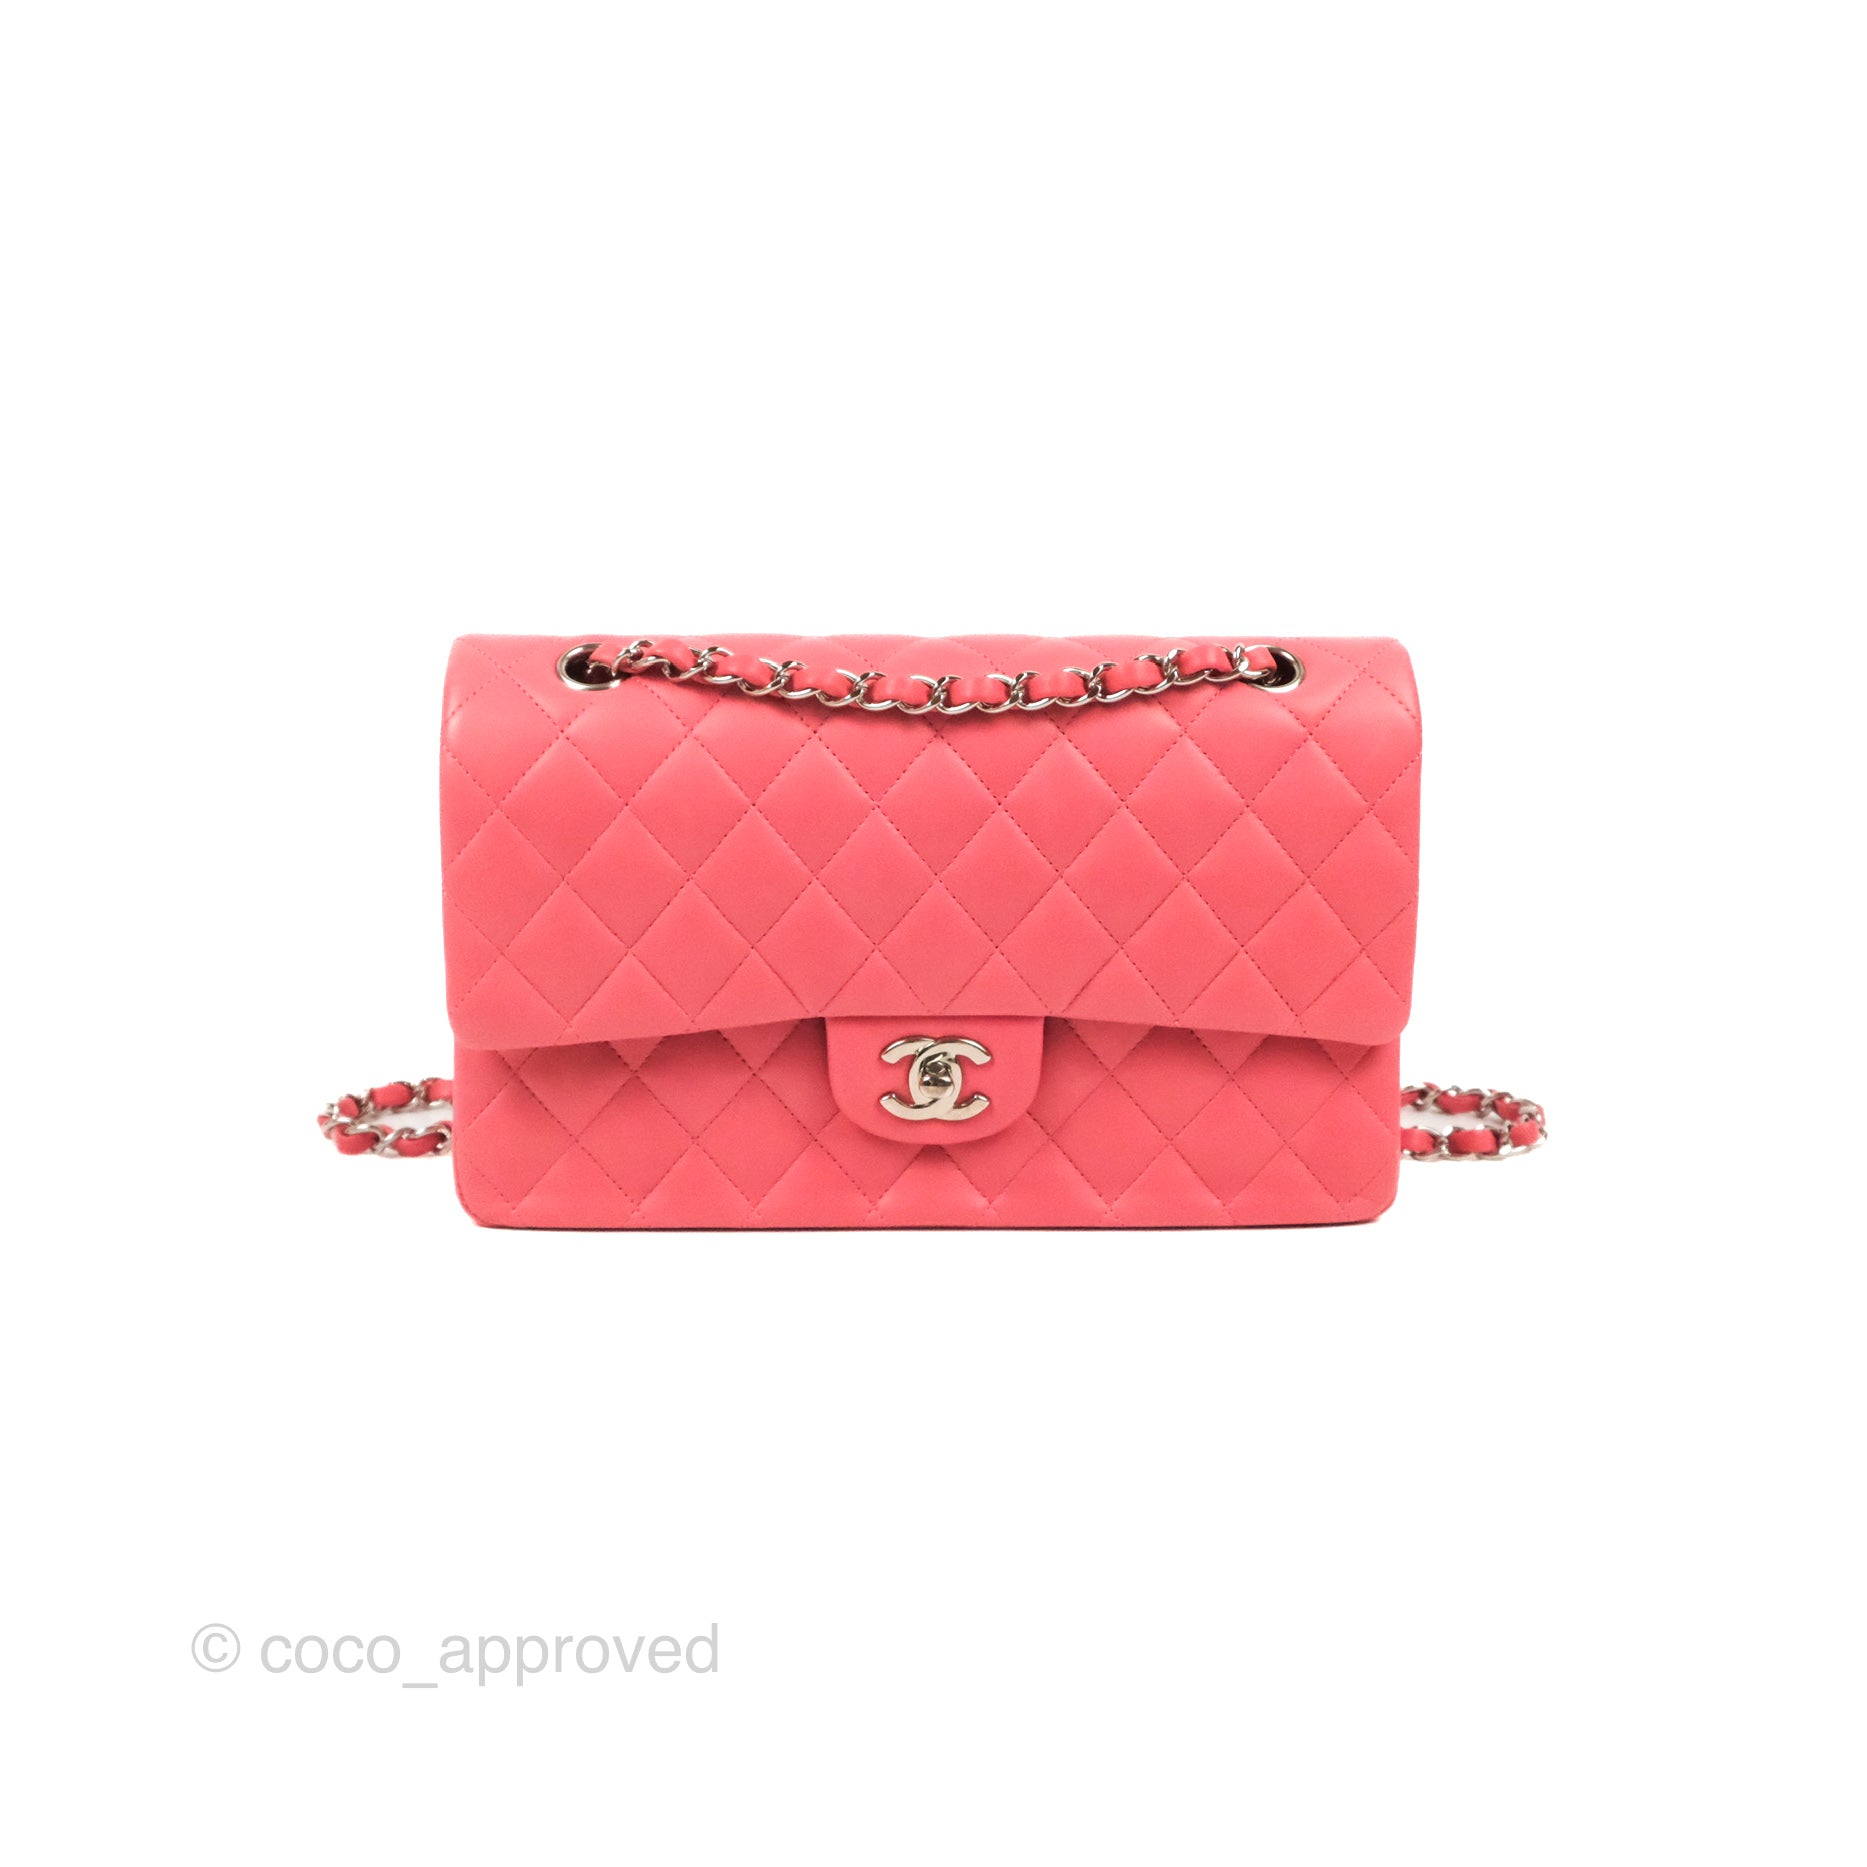 Chanel Classic Medium Flap in Baby Pink Lambskin with Silver